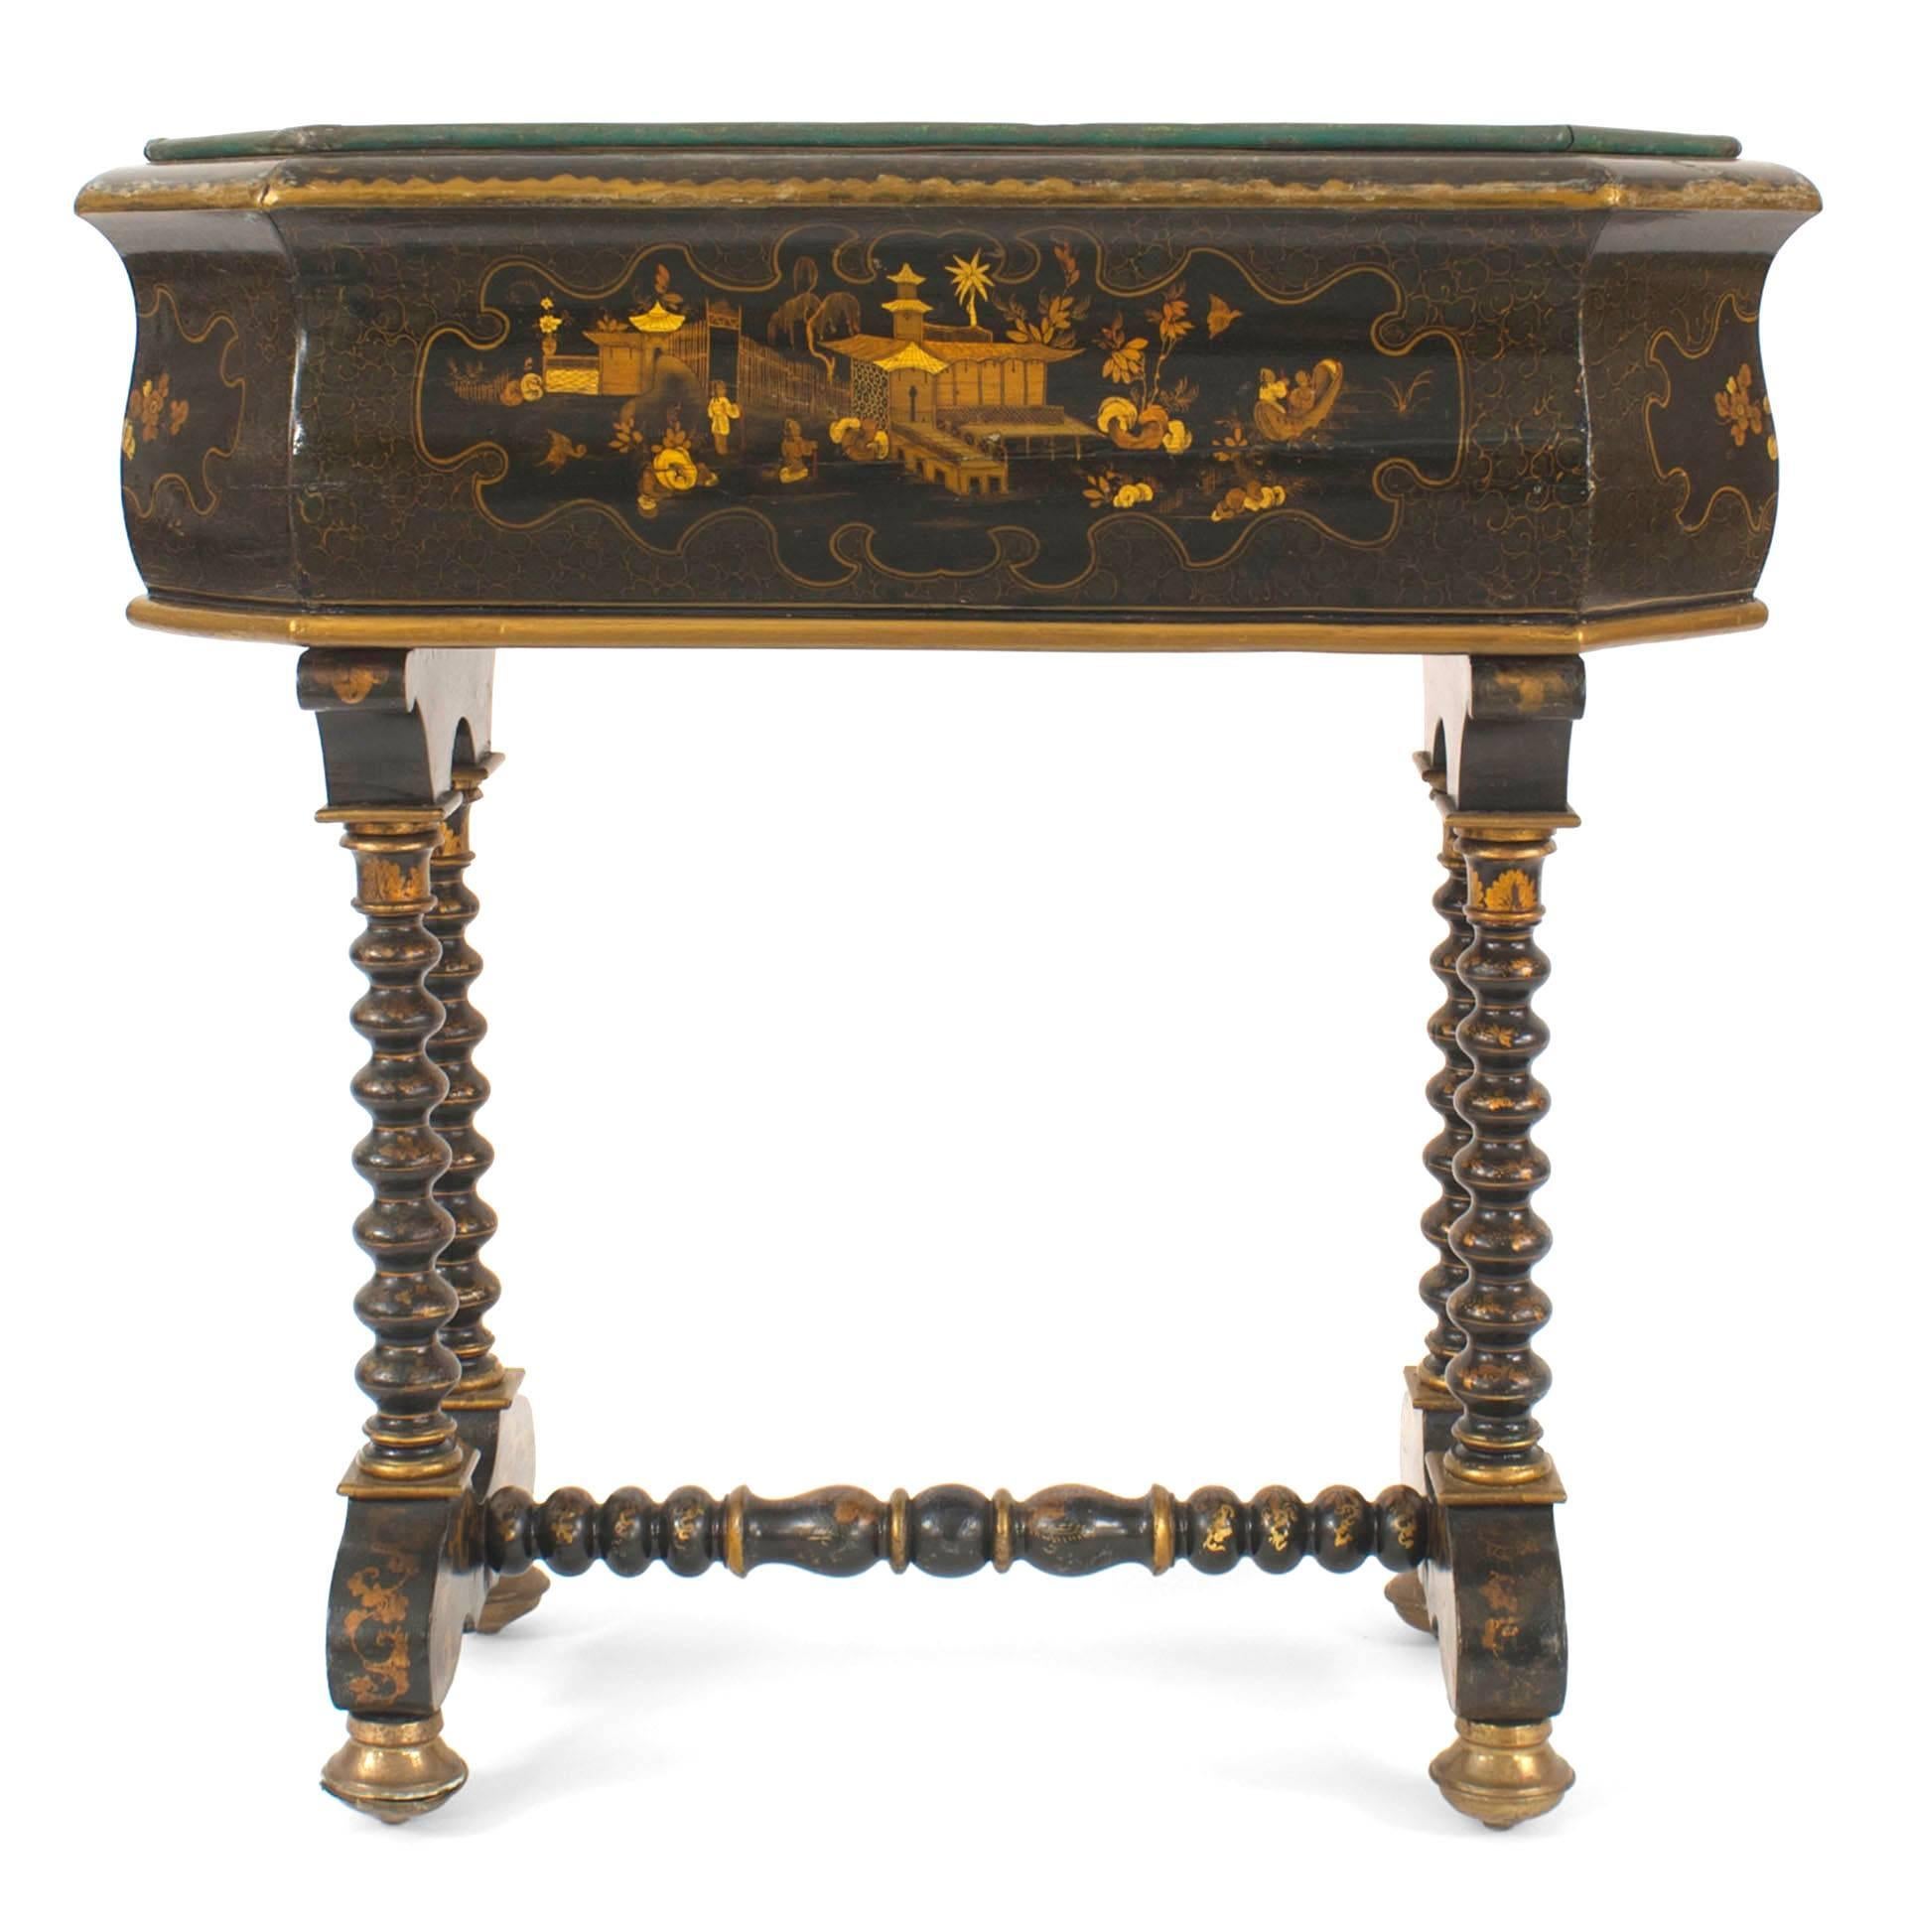 English Queen Anne style gilt and black lacquered Chinoiserie decorated fernery of bombe form on turned legs joined by a stretcher (late 19th-early 20th century).
 